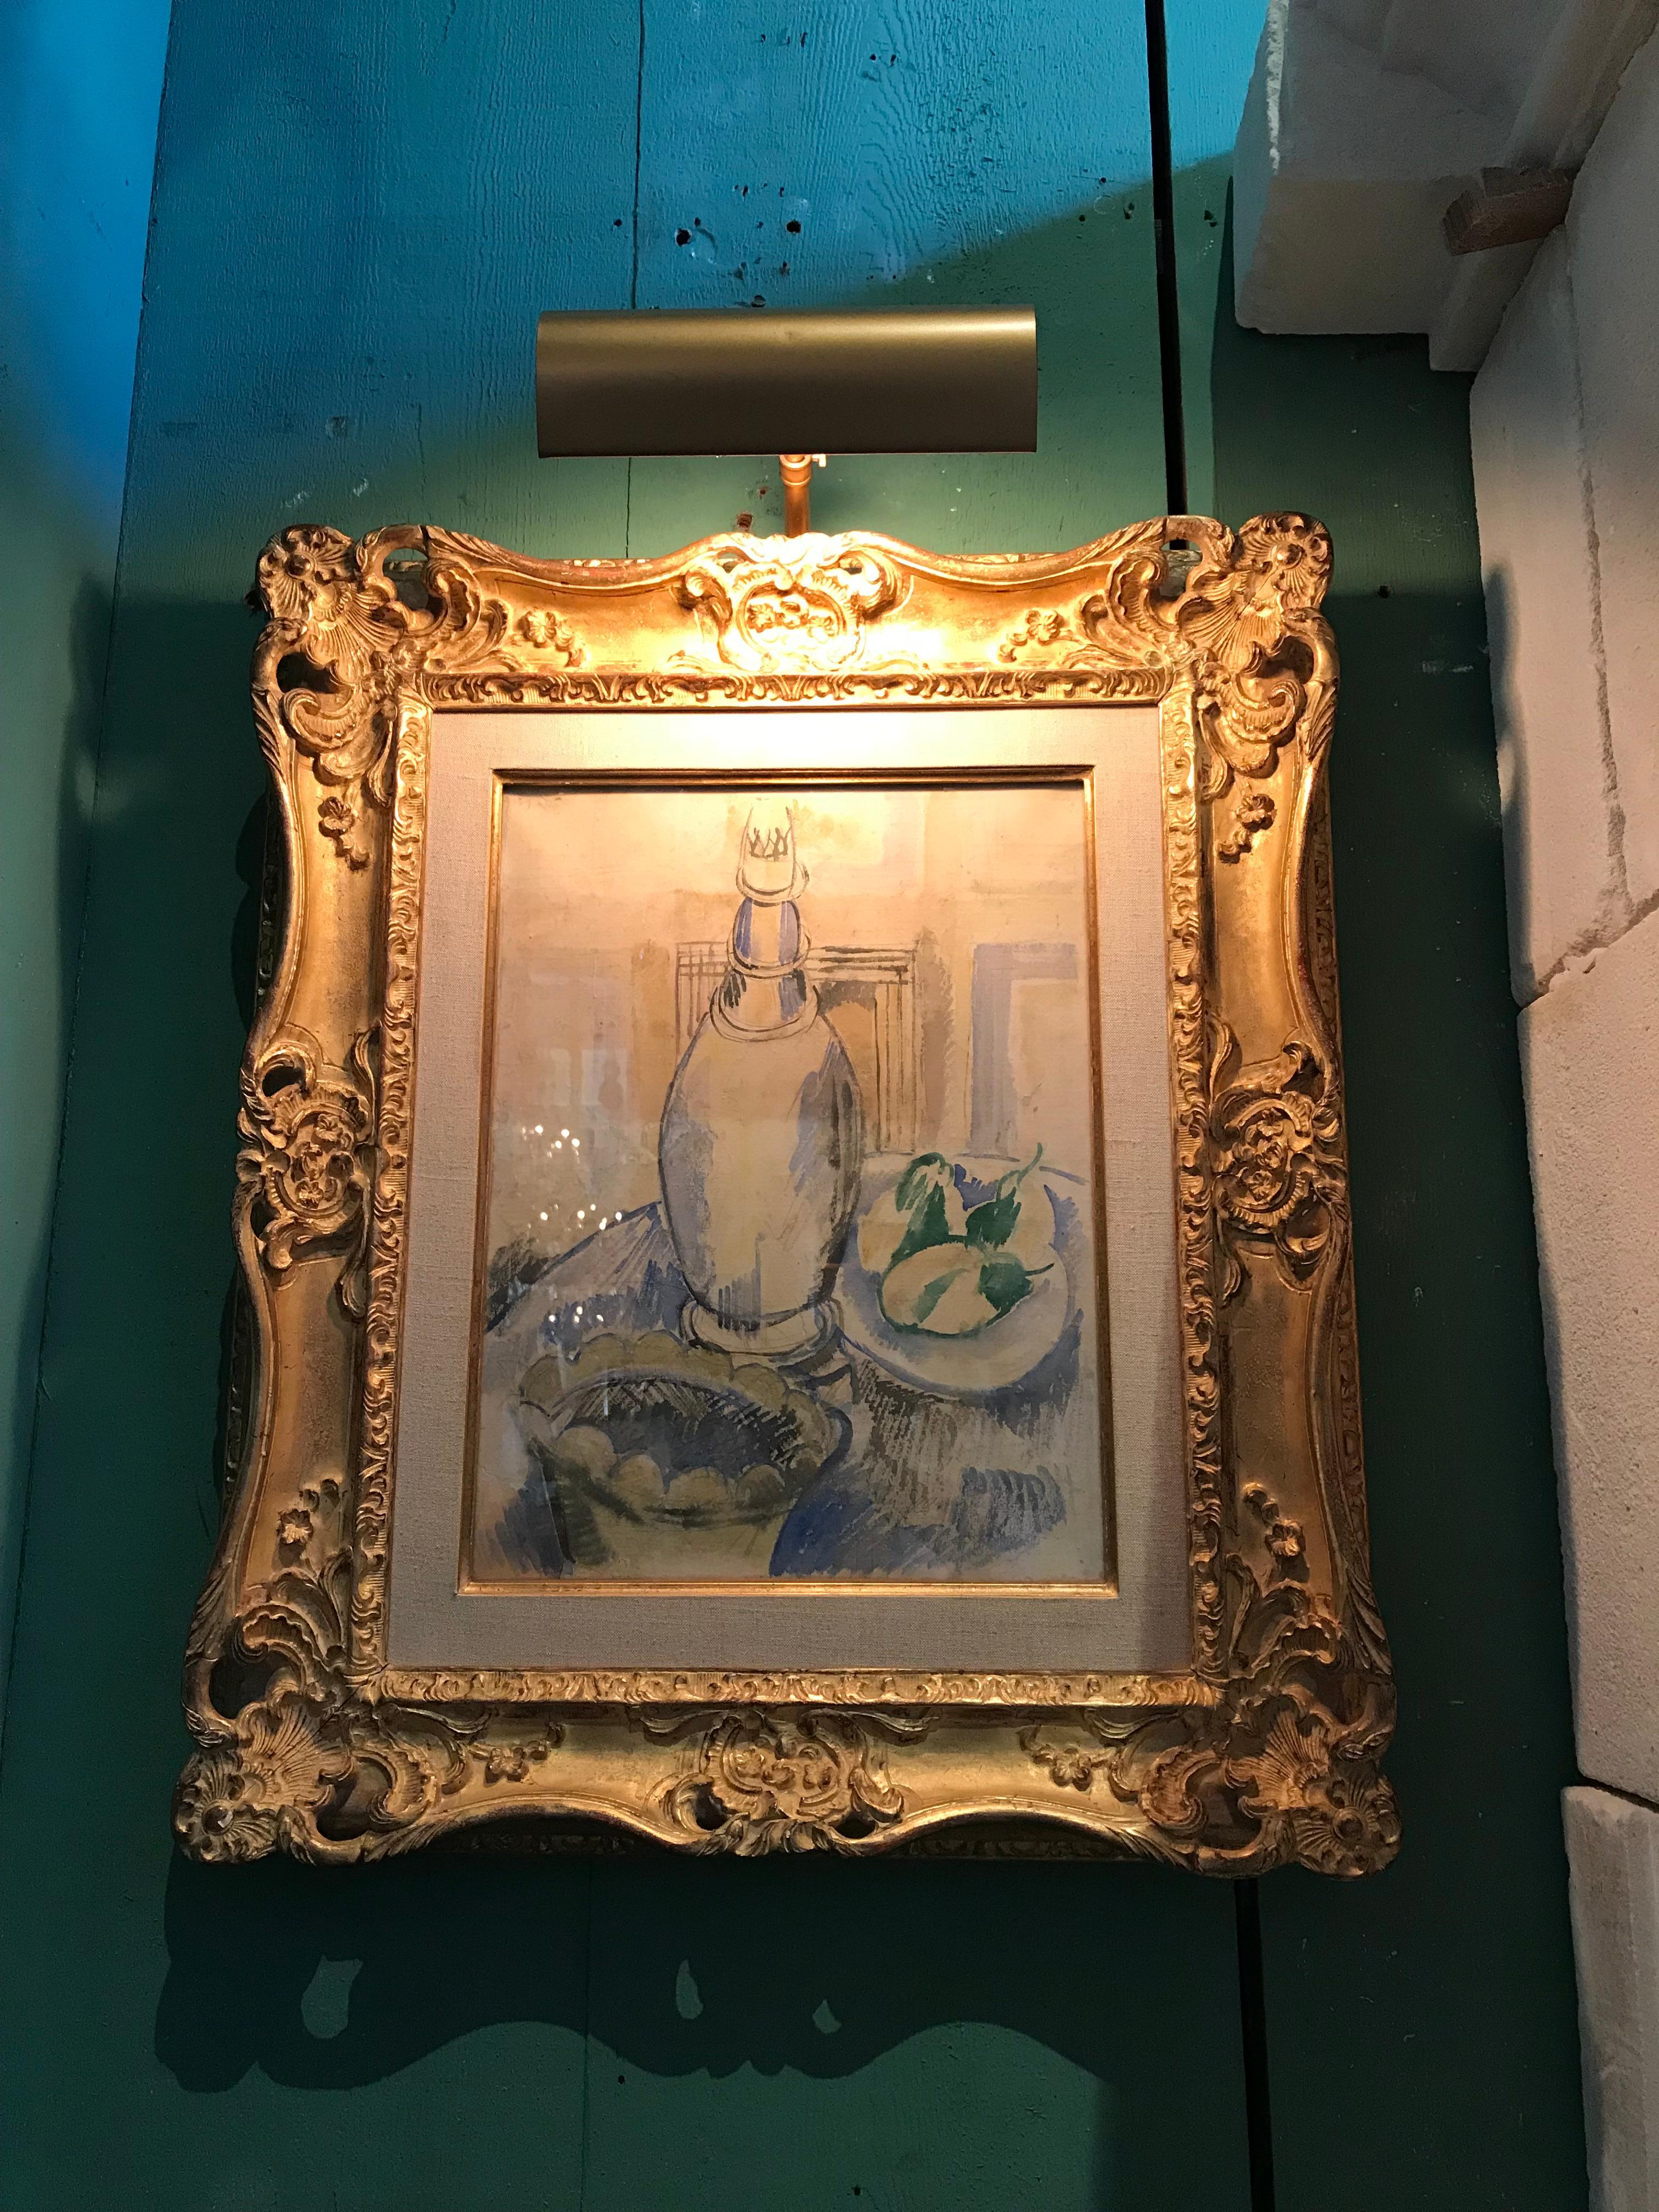 
Jean Dufy Watercolor Still Life Estate Stamp Contemporary Art painting antiques . It is a watercolor on paper by Jean Dufy who was a French Art Deco impressionist painter. IT IS NOT A LITOGRAPH, it’s an Original. In a modern interior design or an